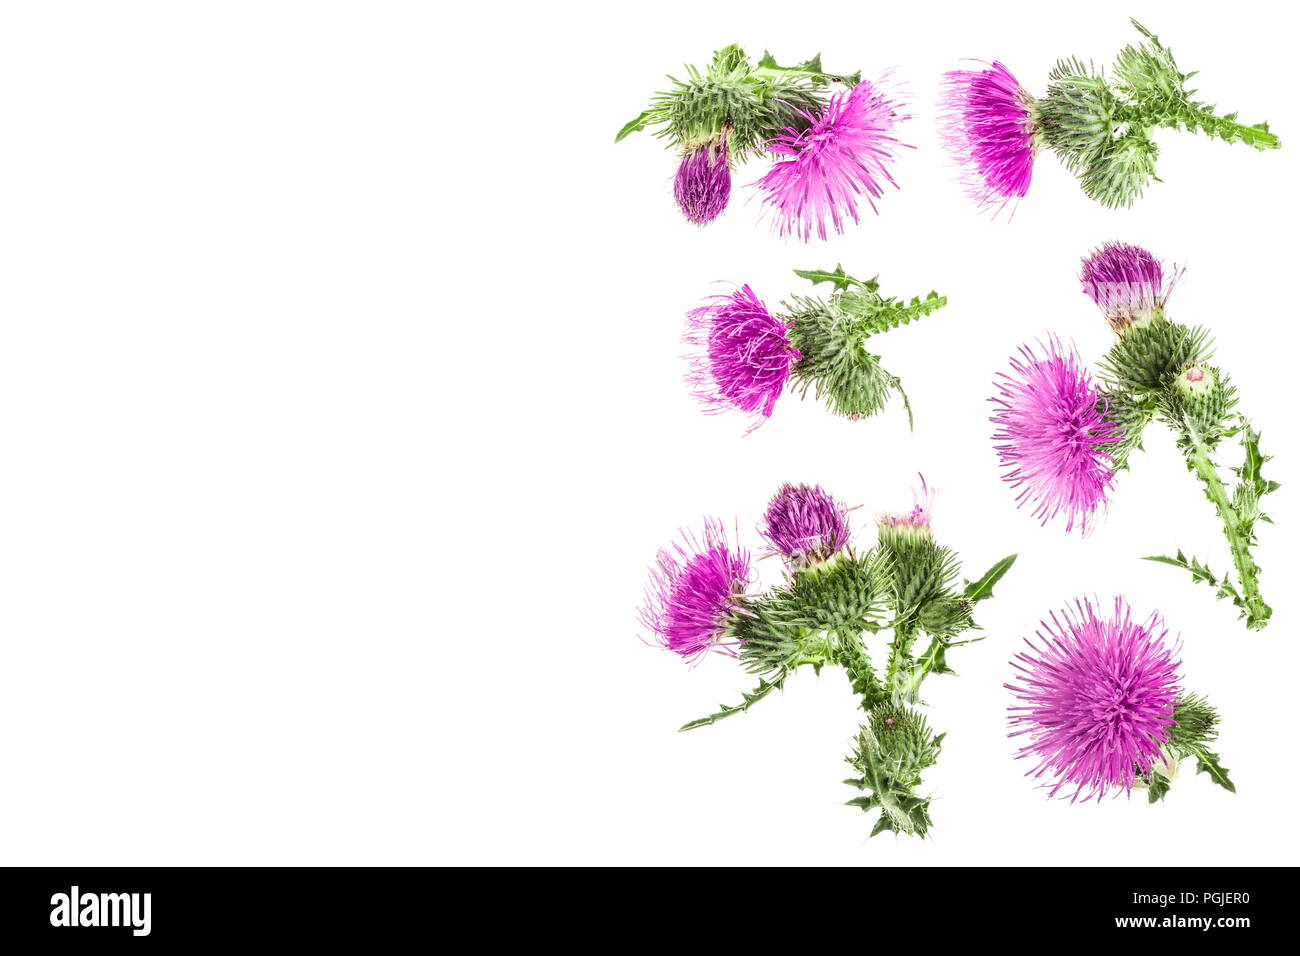 milk thistle flower isolated on white background with copy space for your text. Top view. Flat lay pattern. Stock Photo